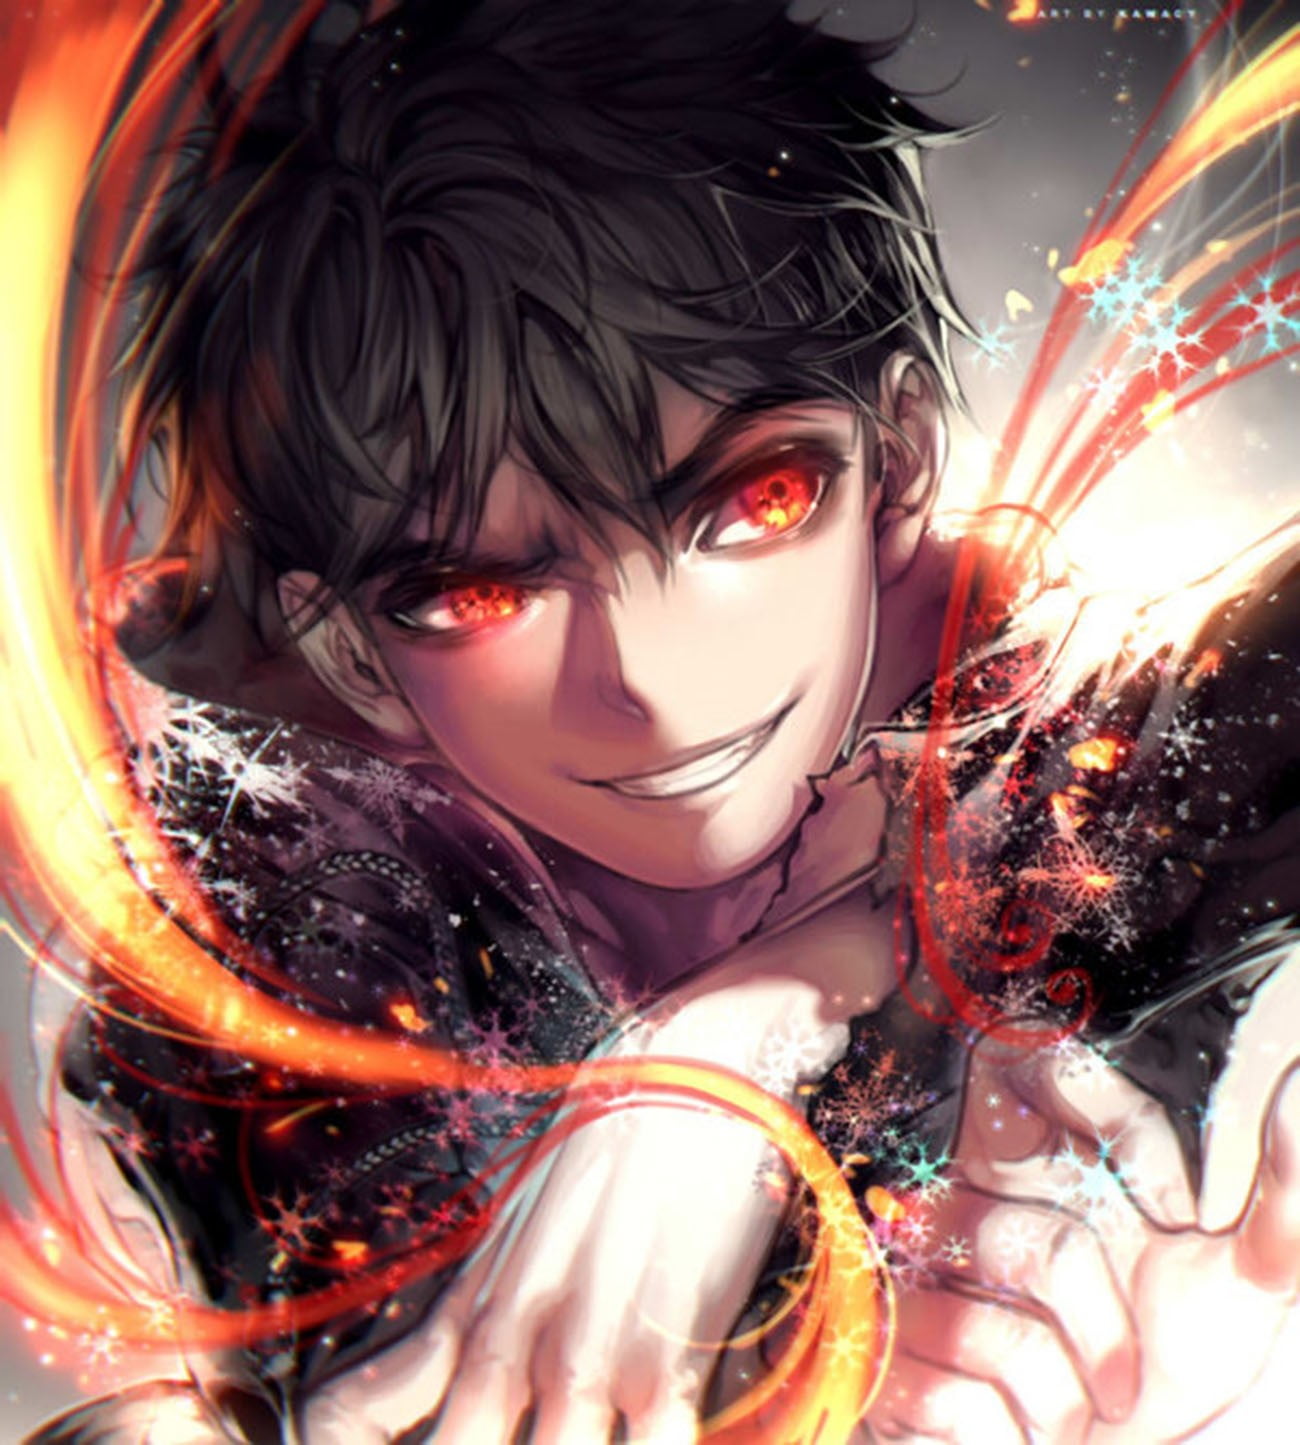 Male Anime Character Wallpaper Jack Nightmare Anime Boys Red